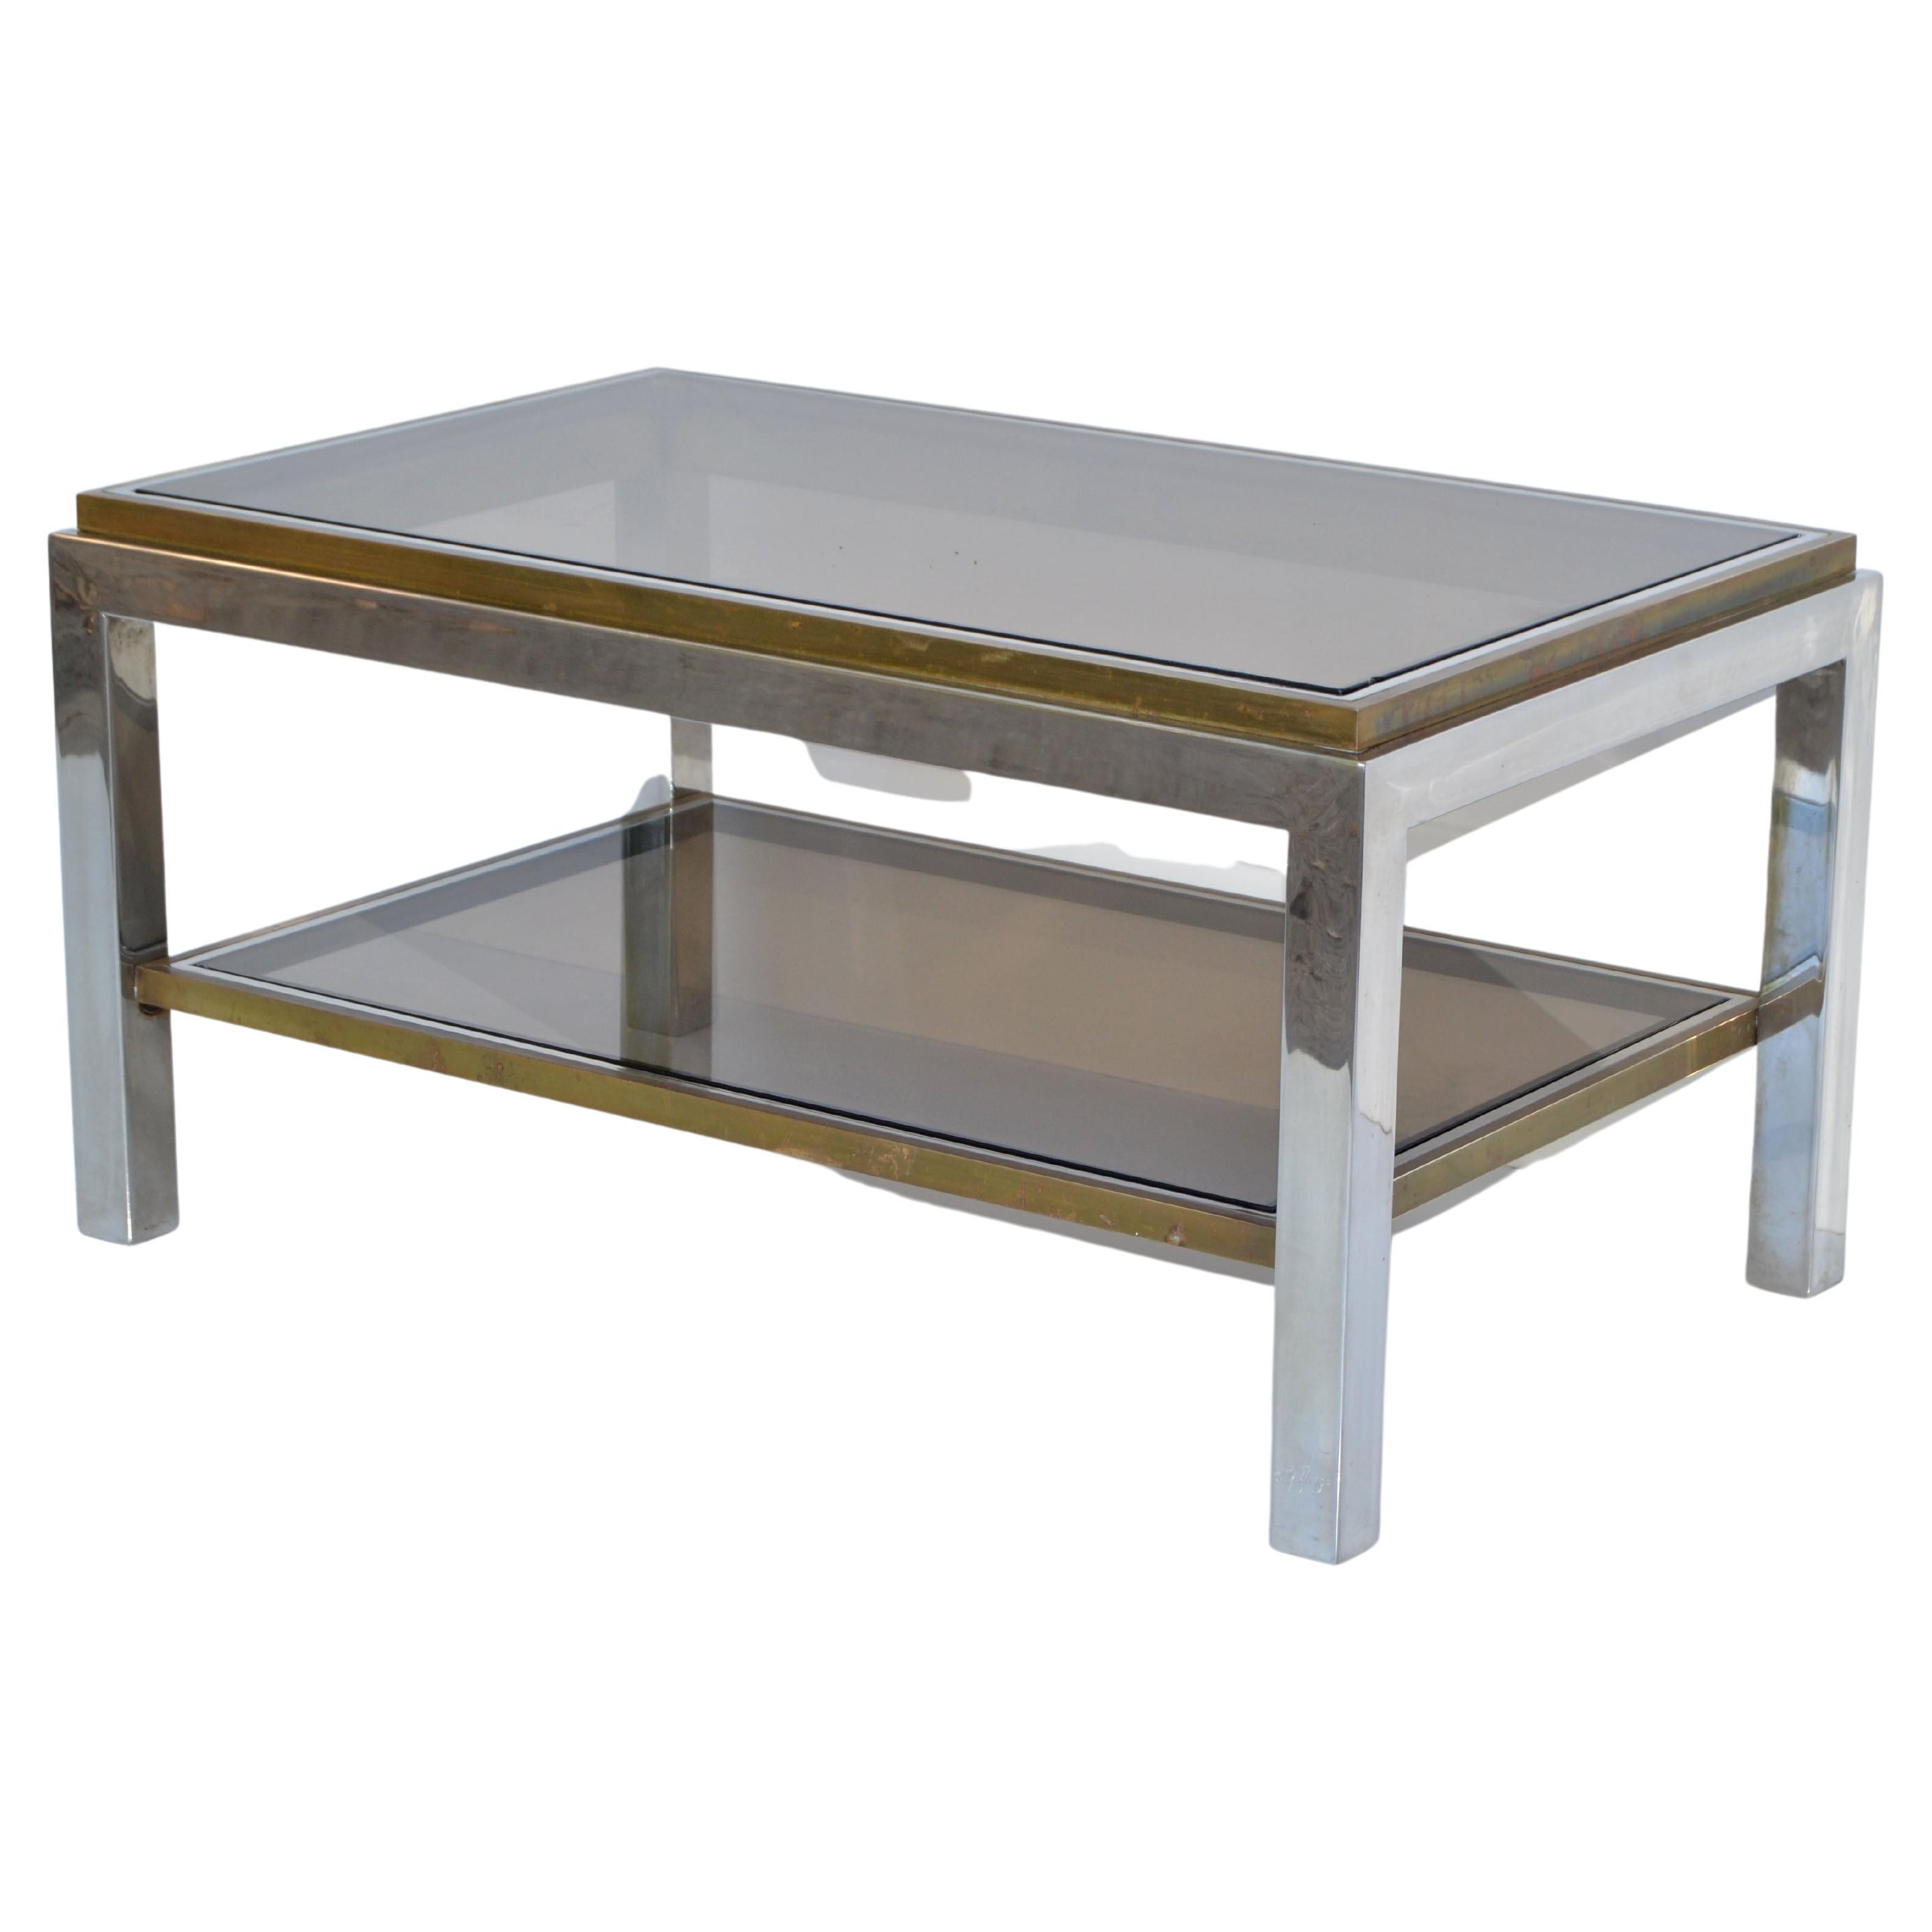 Very elegant two-tier coffee table signed Willy Rizzo made in Italy, circa 1965.
Sturdy chrome frame with brass inlay and smoked glass tops.
Space in between the glass is 7.5 inches.
Engraved Signature at the Leg: Willy Rizzo.
Mid-Century Modern